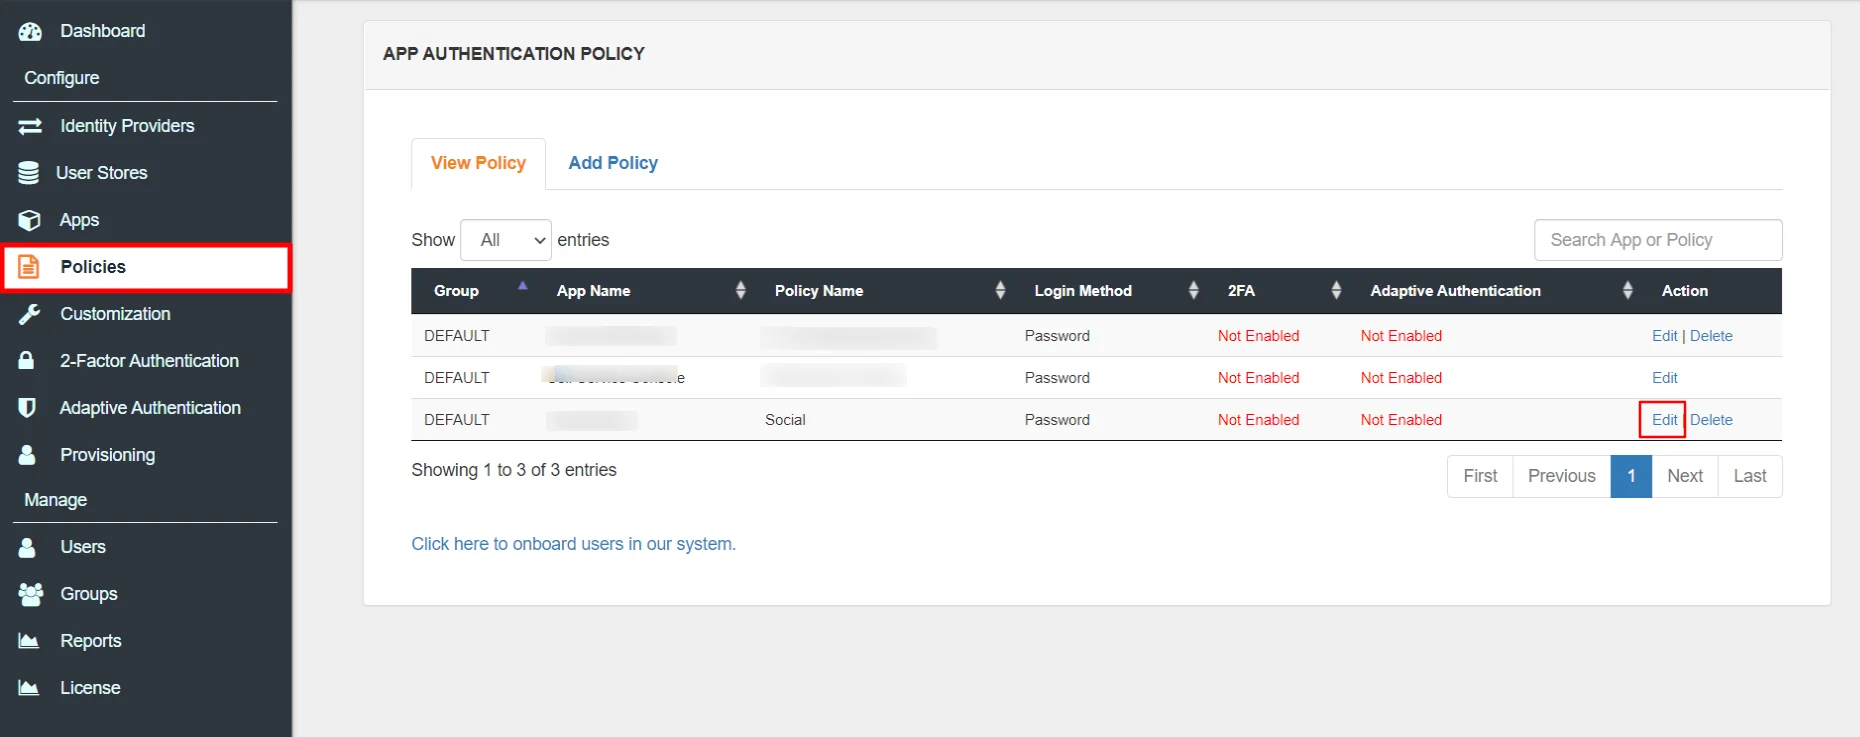 Amazon Web Services(AWS) Single Sign-On (SSO) Restrict Access adaptive authnetication policy